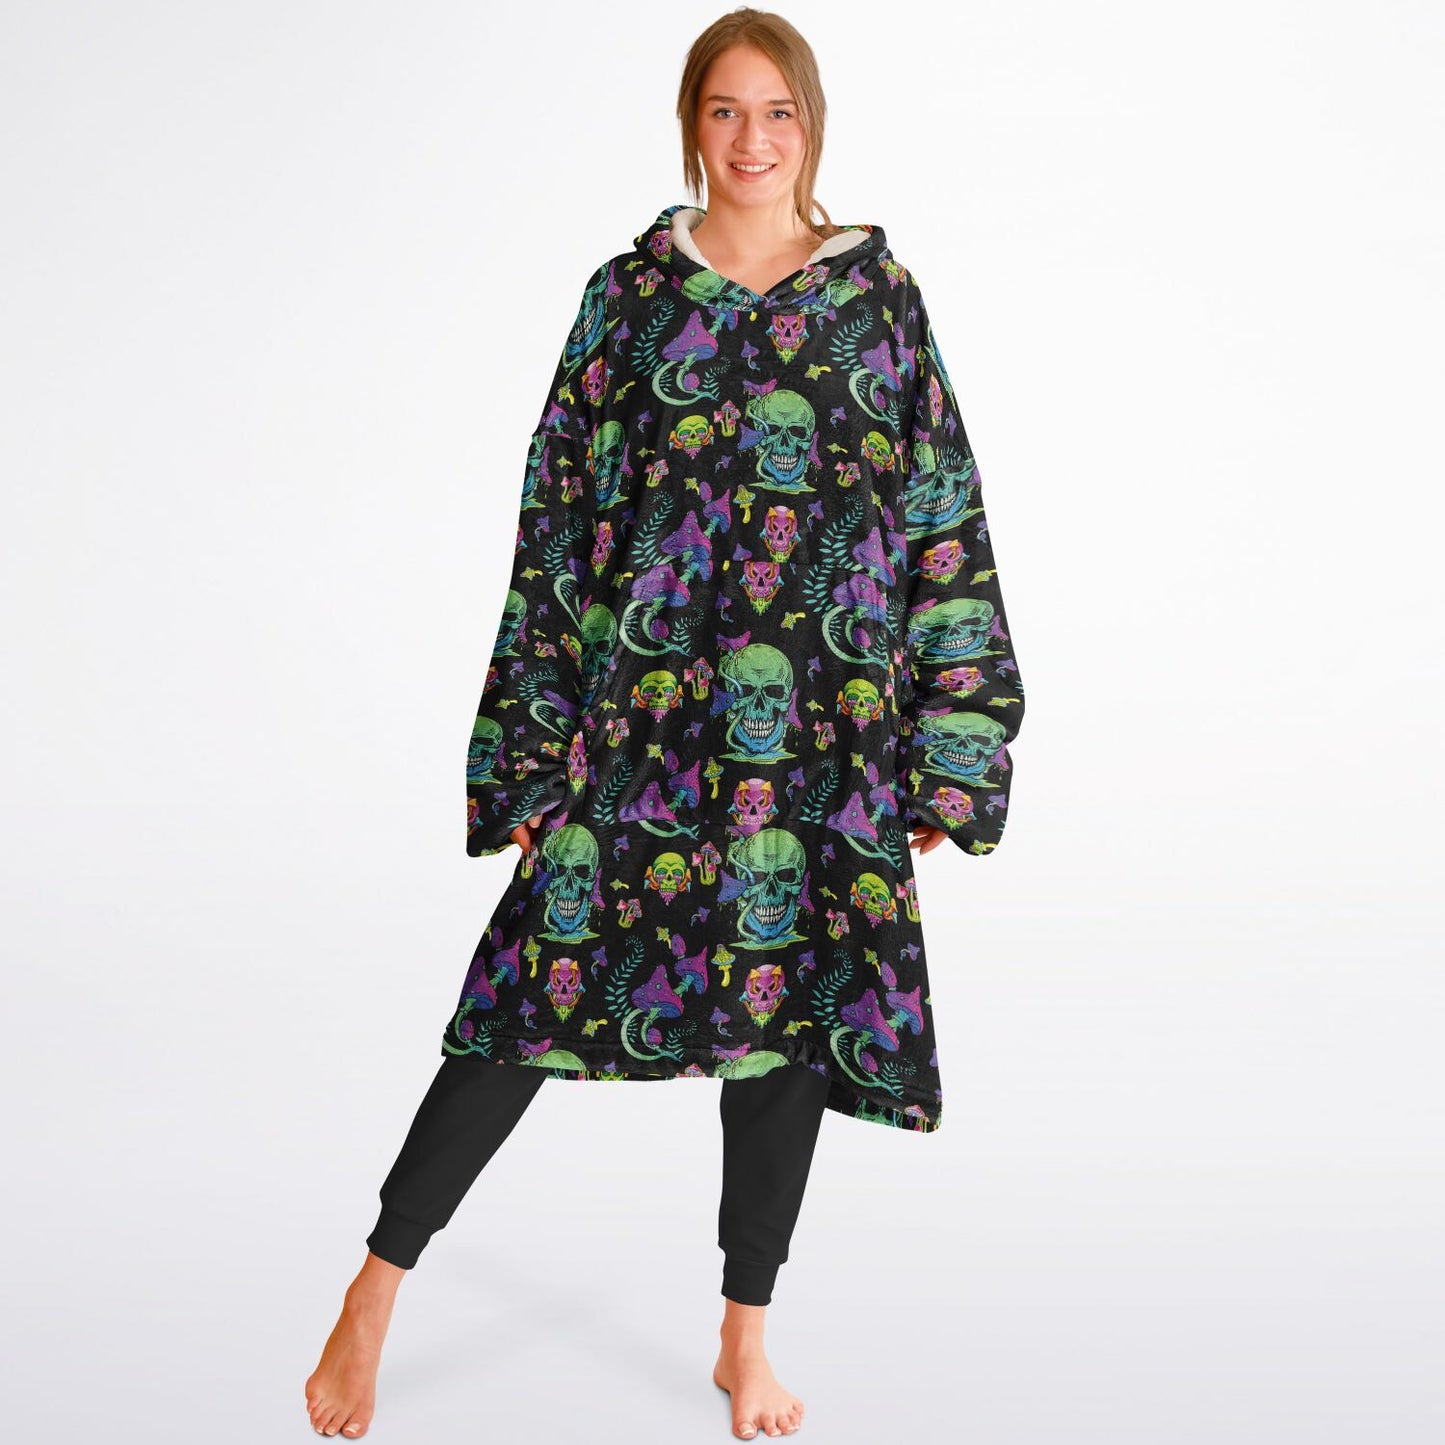 Psychedelic Mushie Snug SuperHoodie - Limited Edition Buy 2 & Get FREE Shipping